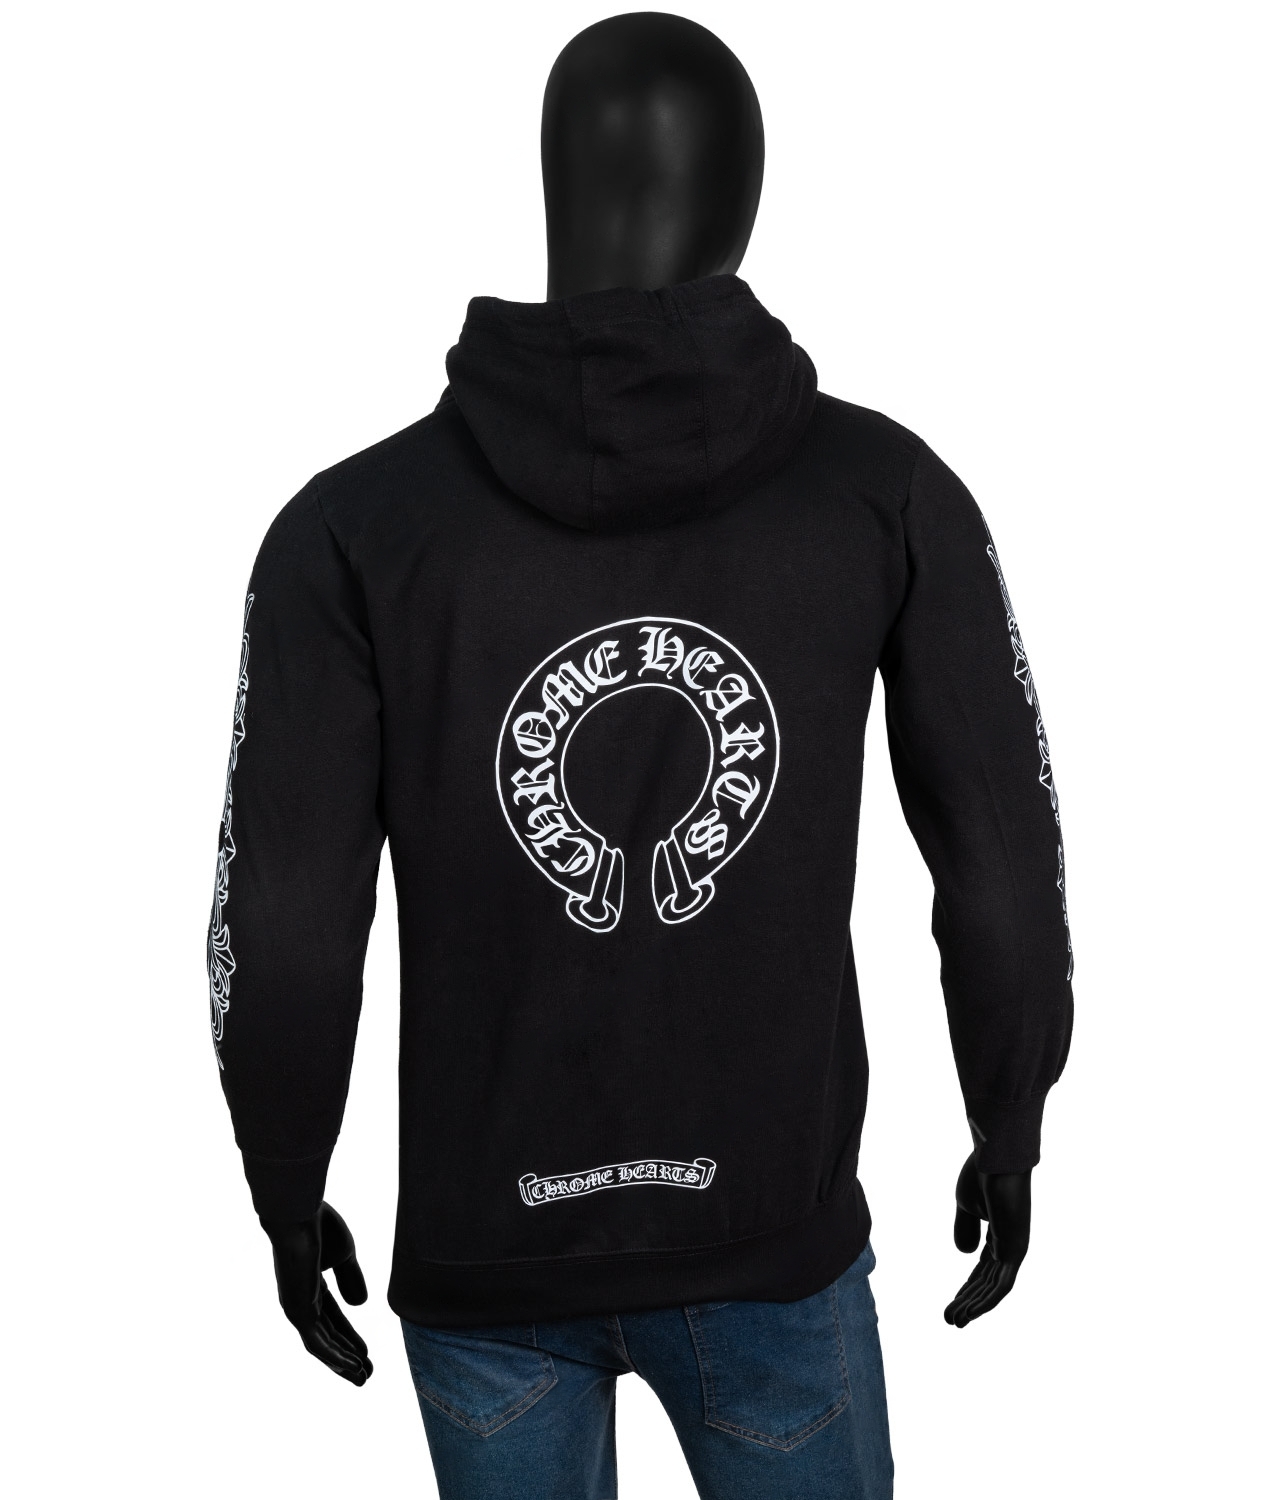 Chrome Hearts Hoodie For Sale - William Jacket